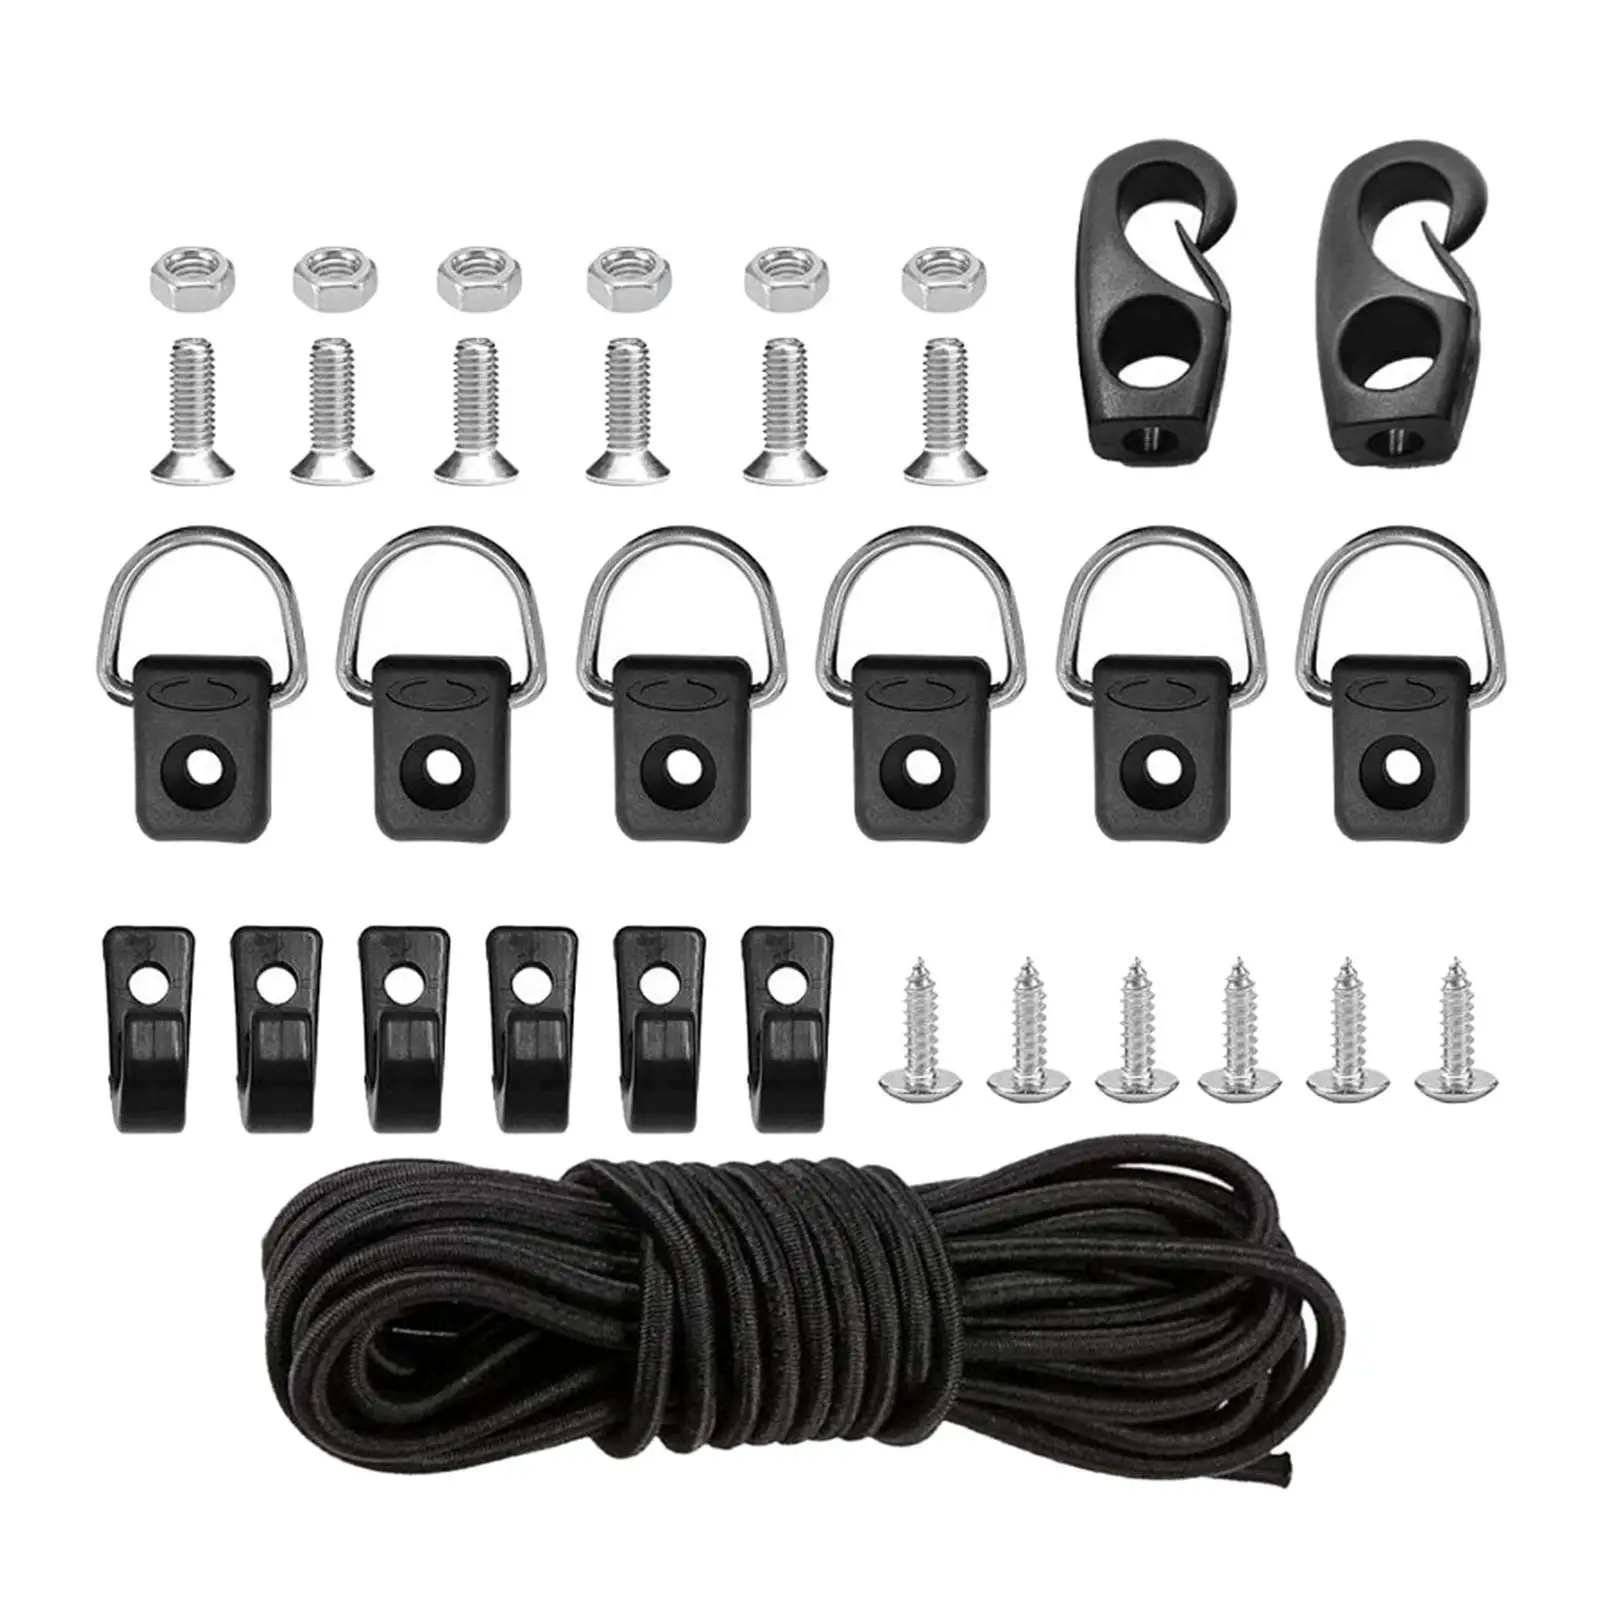 Kayak Deck Rigging Kit D Rings 8.  Cord for Fishing Accessories